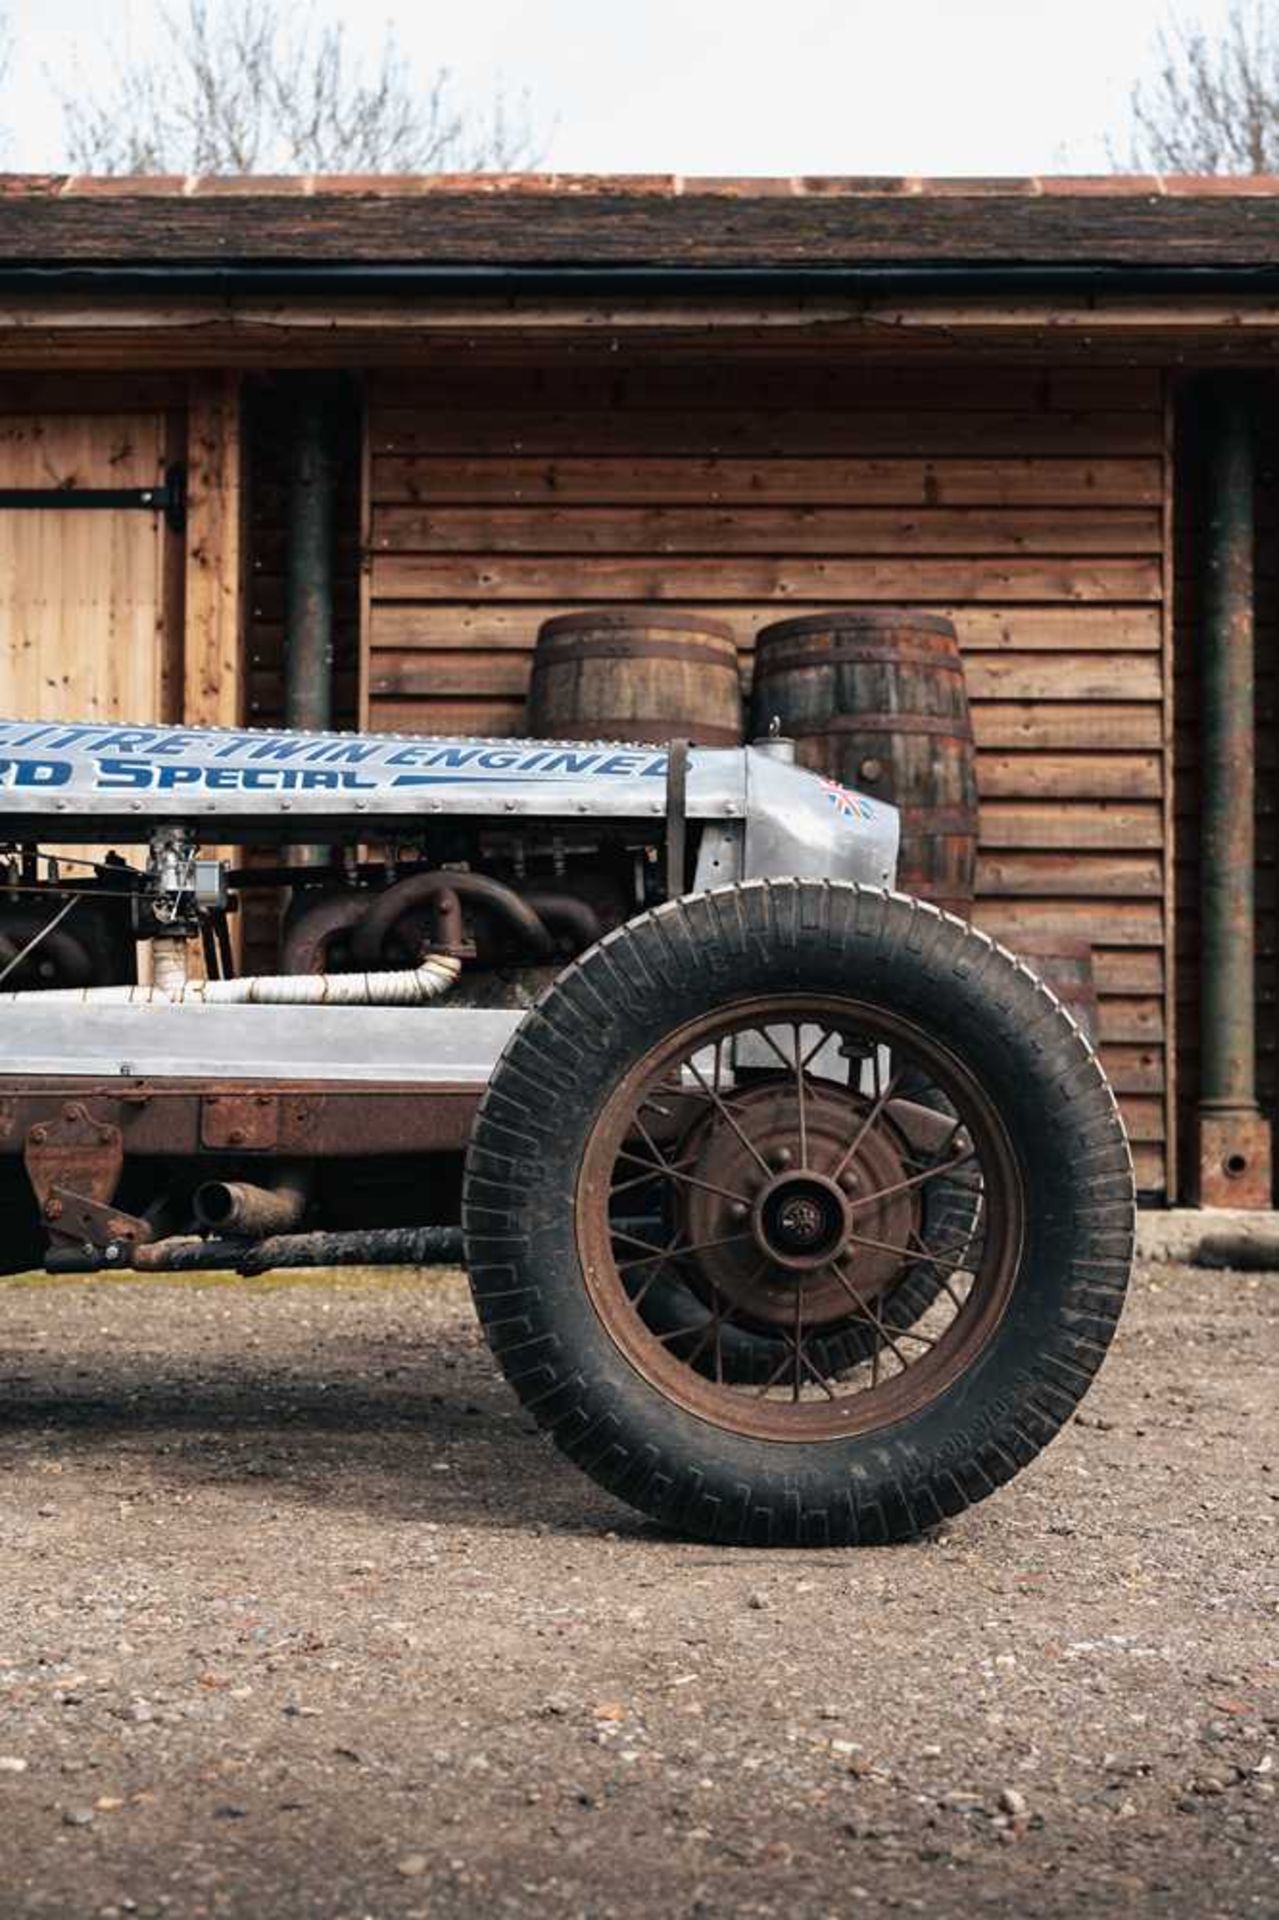 1930 Ford Model A "The Ballard Special" Speedster One off, bespoke built twin-engined pre-war racing - Image 32 of 94